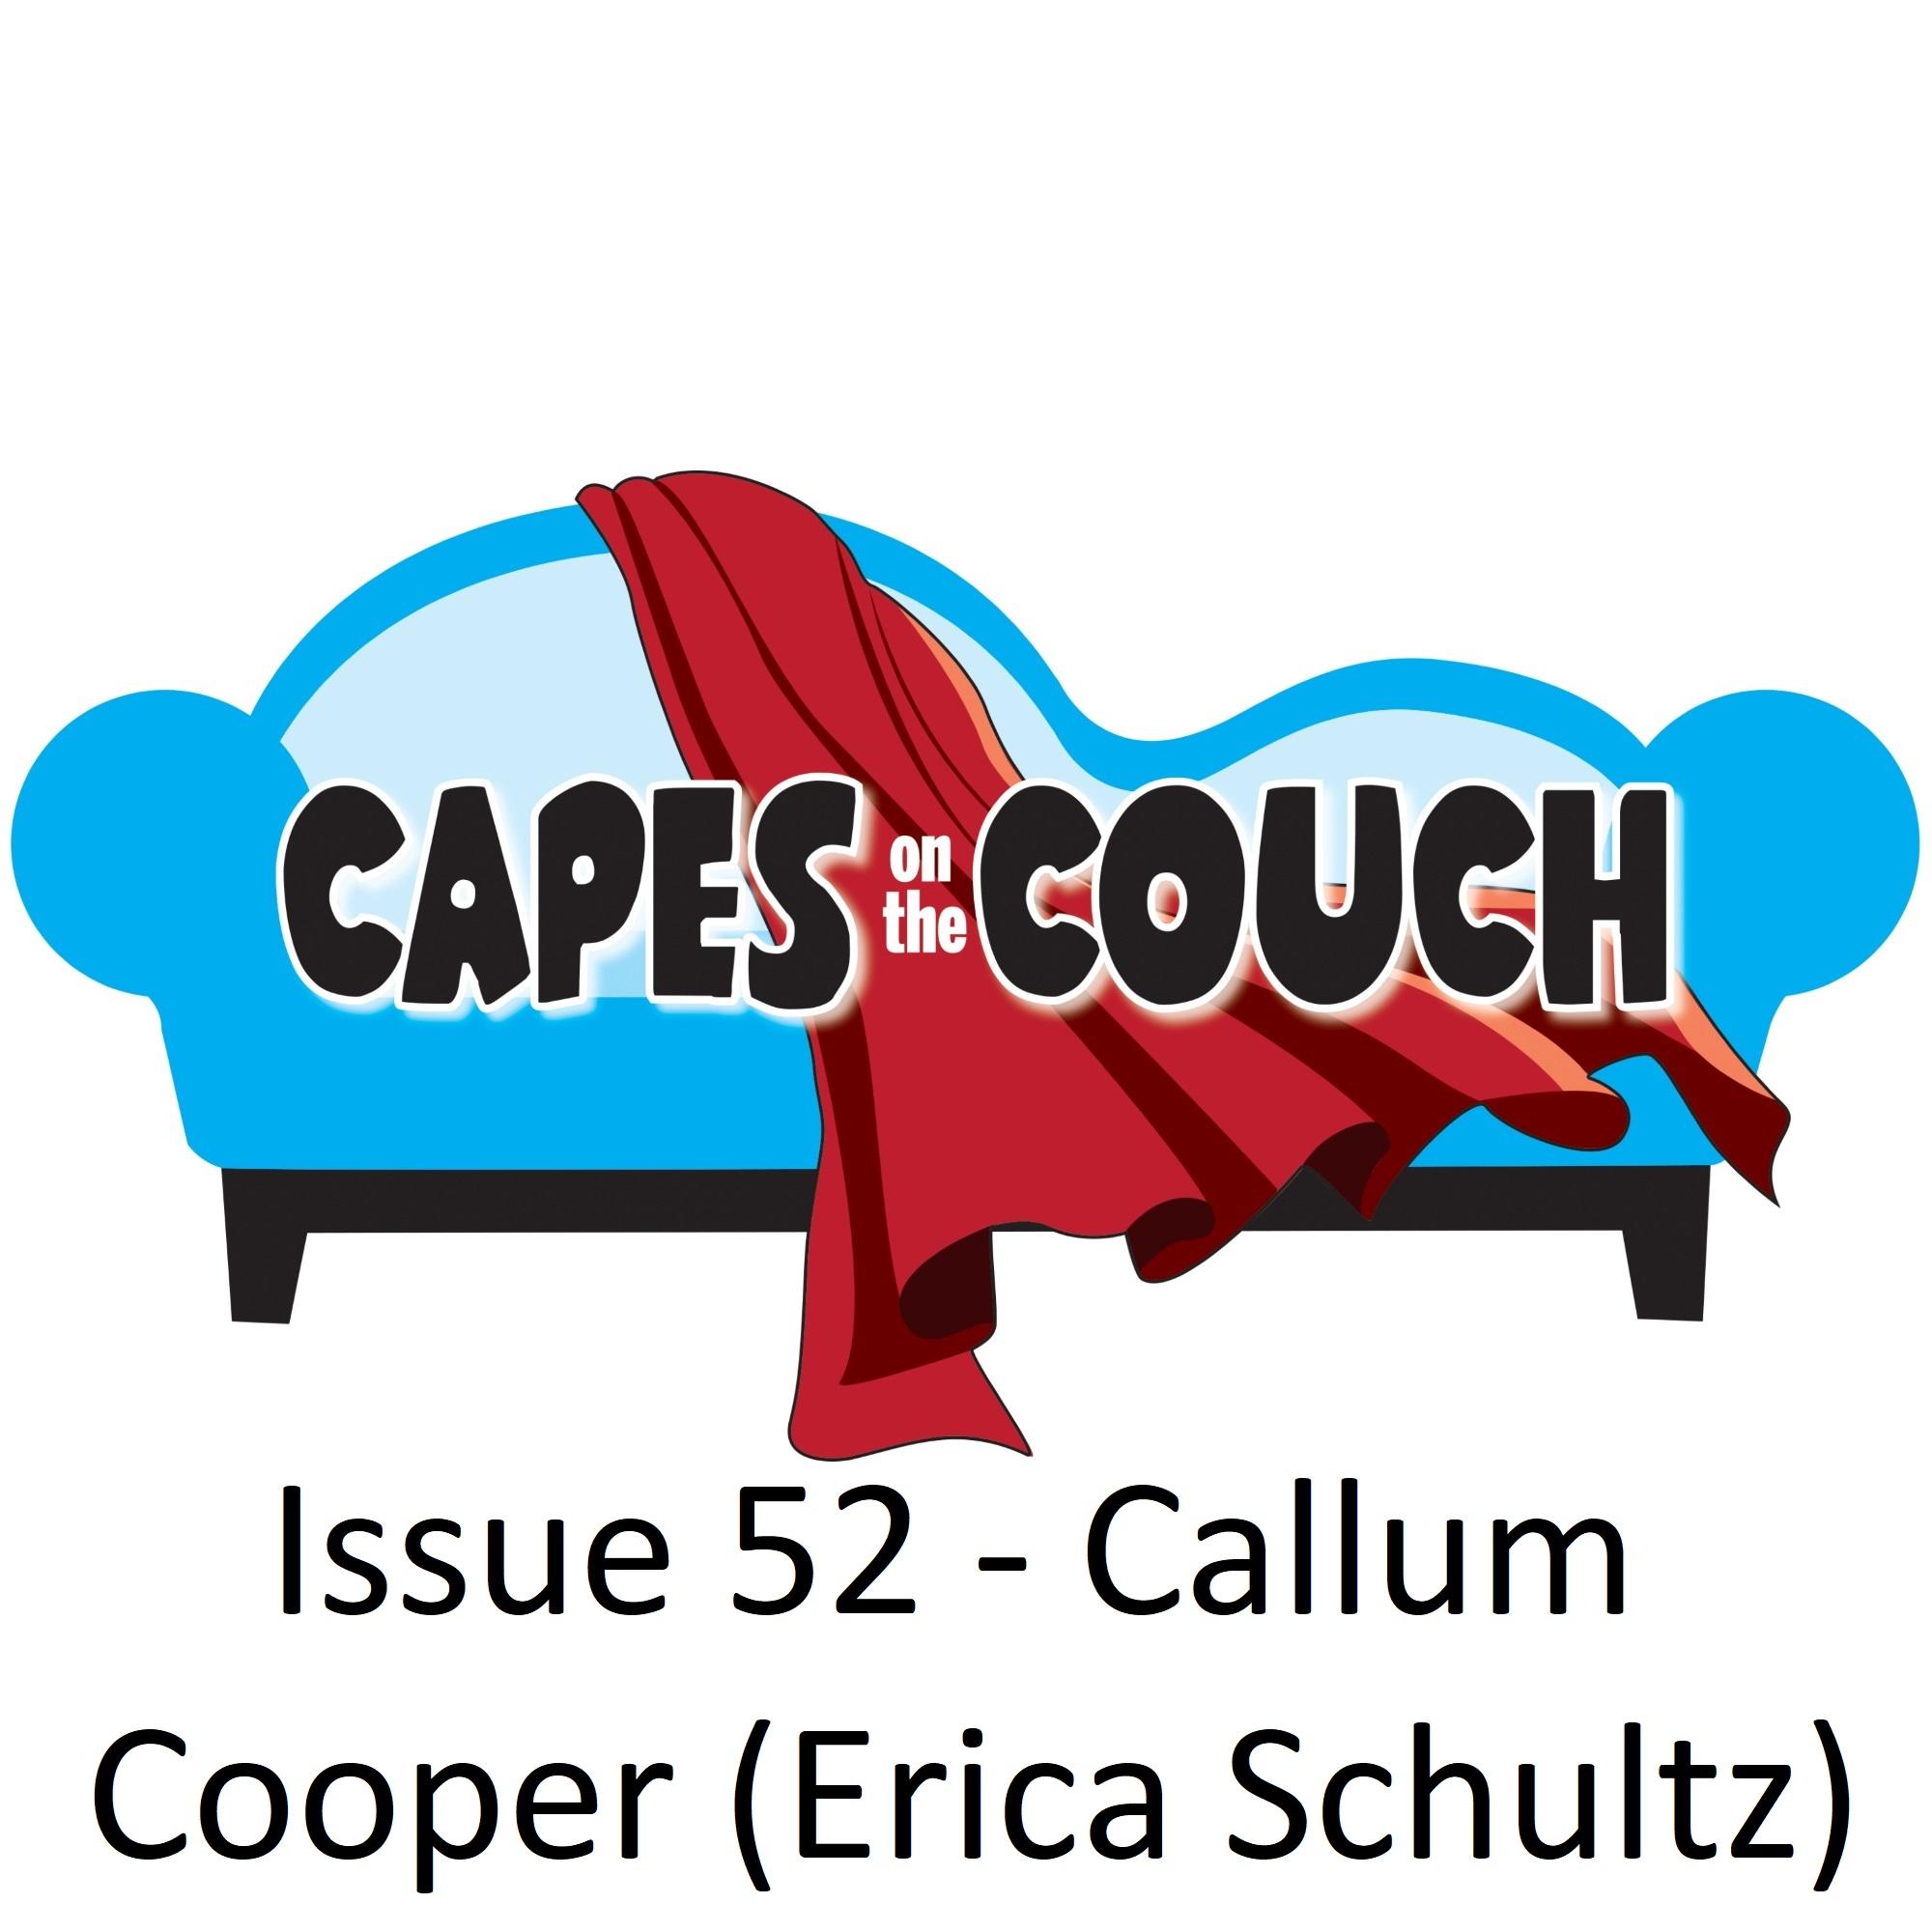 Issue 52 – Creators on the Couch – Callum Cooper post thumbnail image